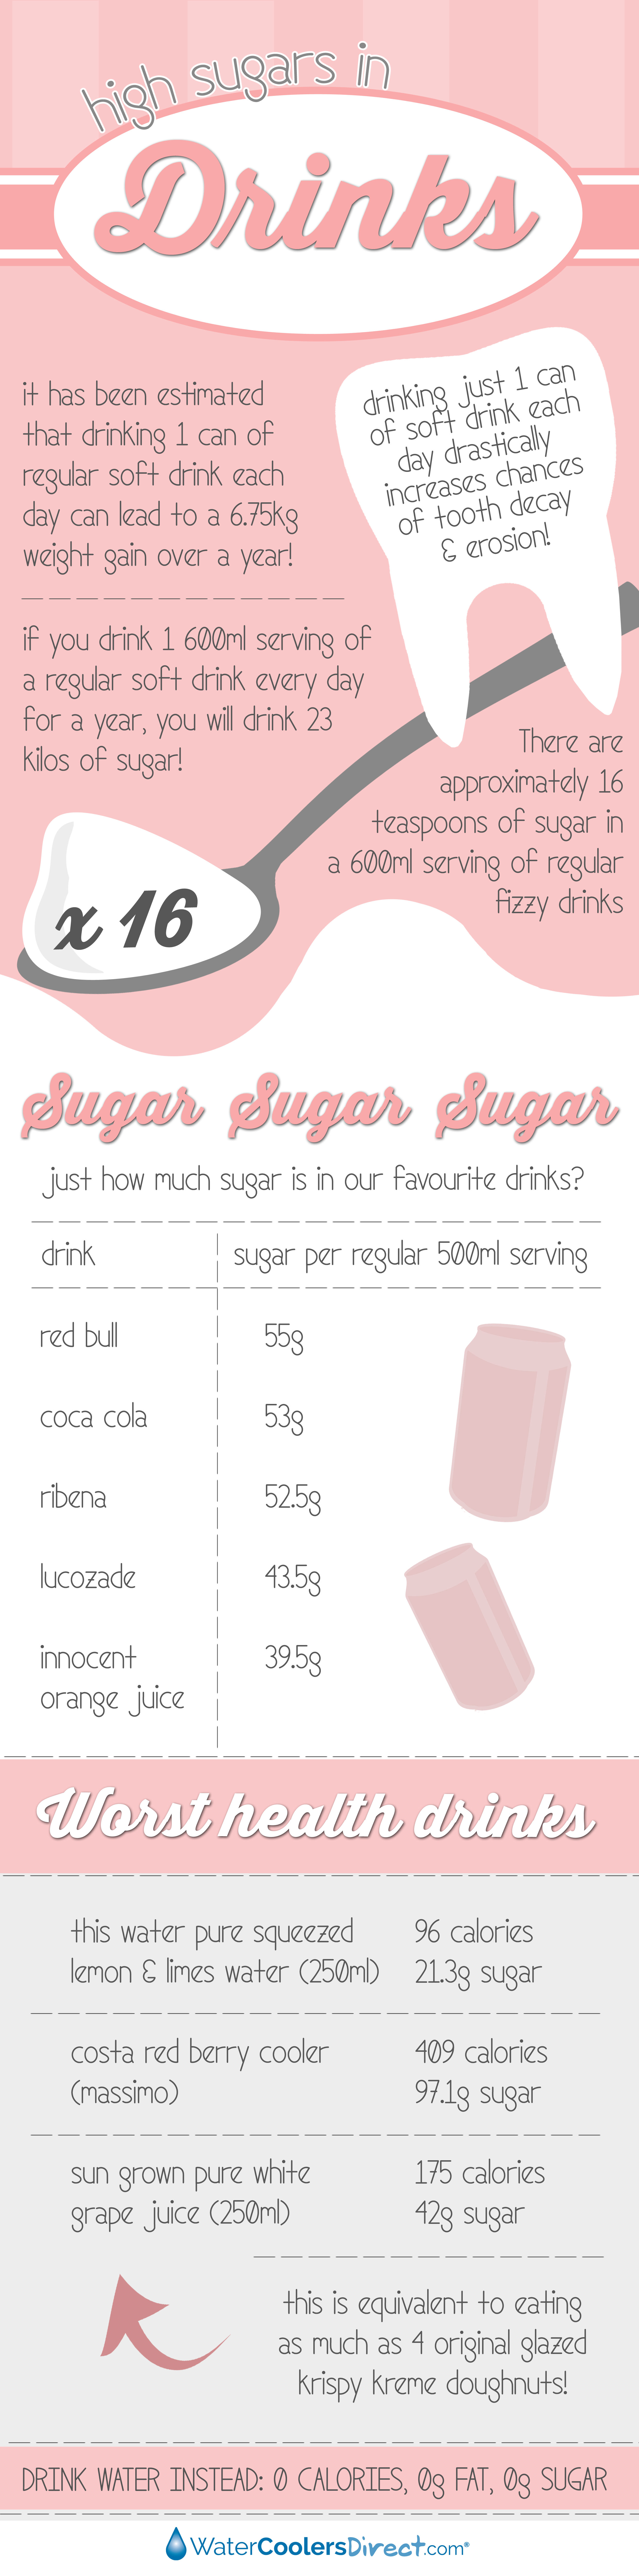 High sugars in drinks